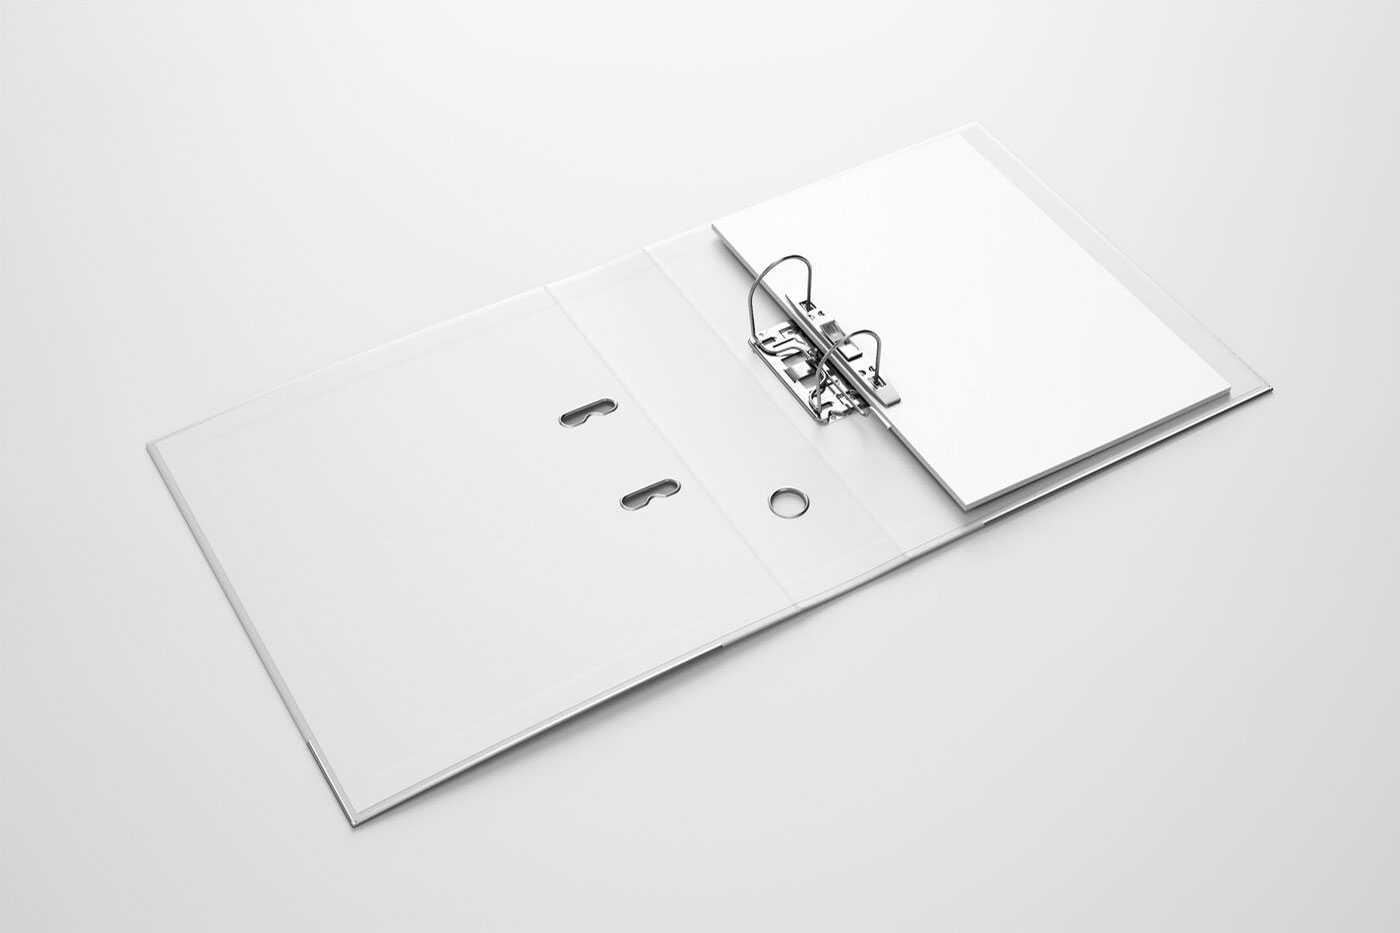 Perspective Mockup Featuring a Binder with Papers FREE PSD